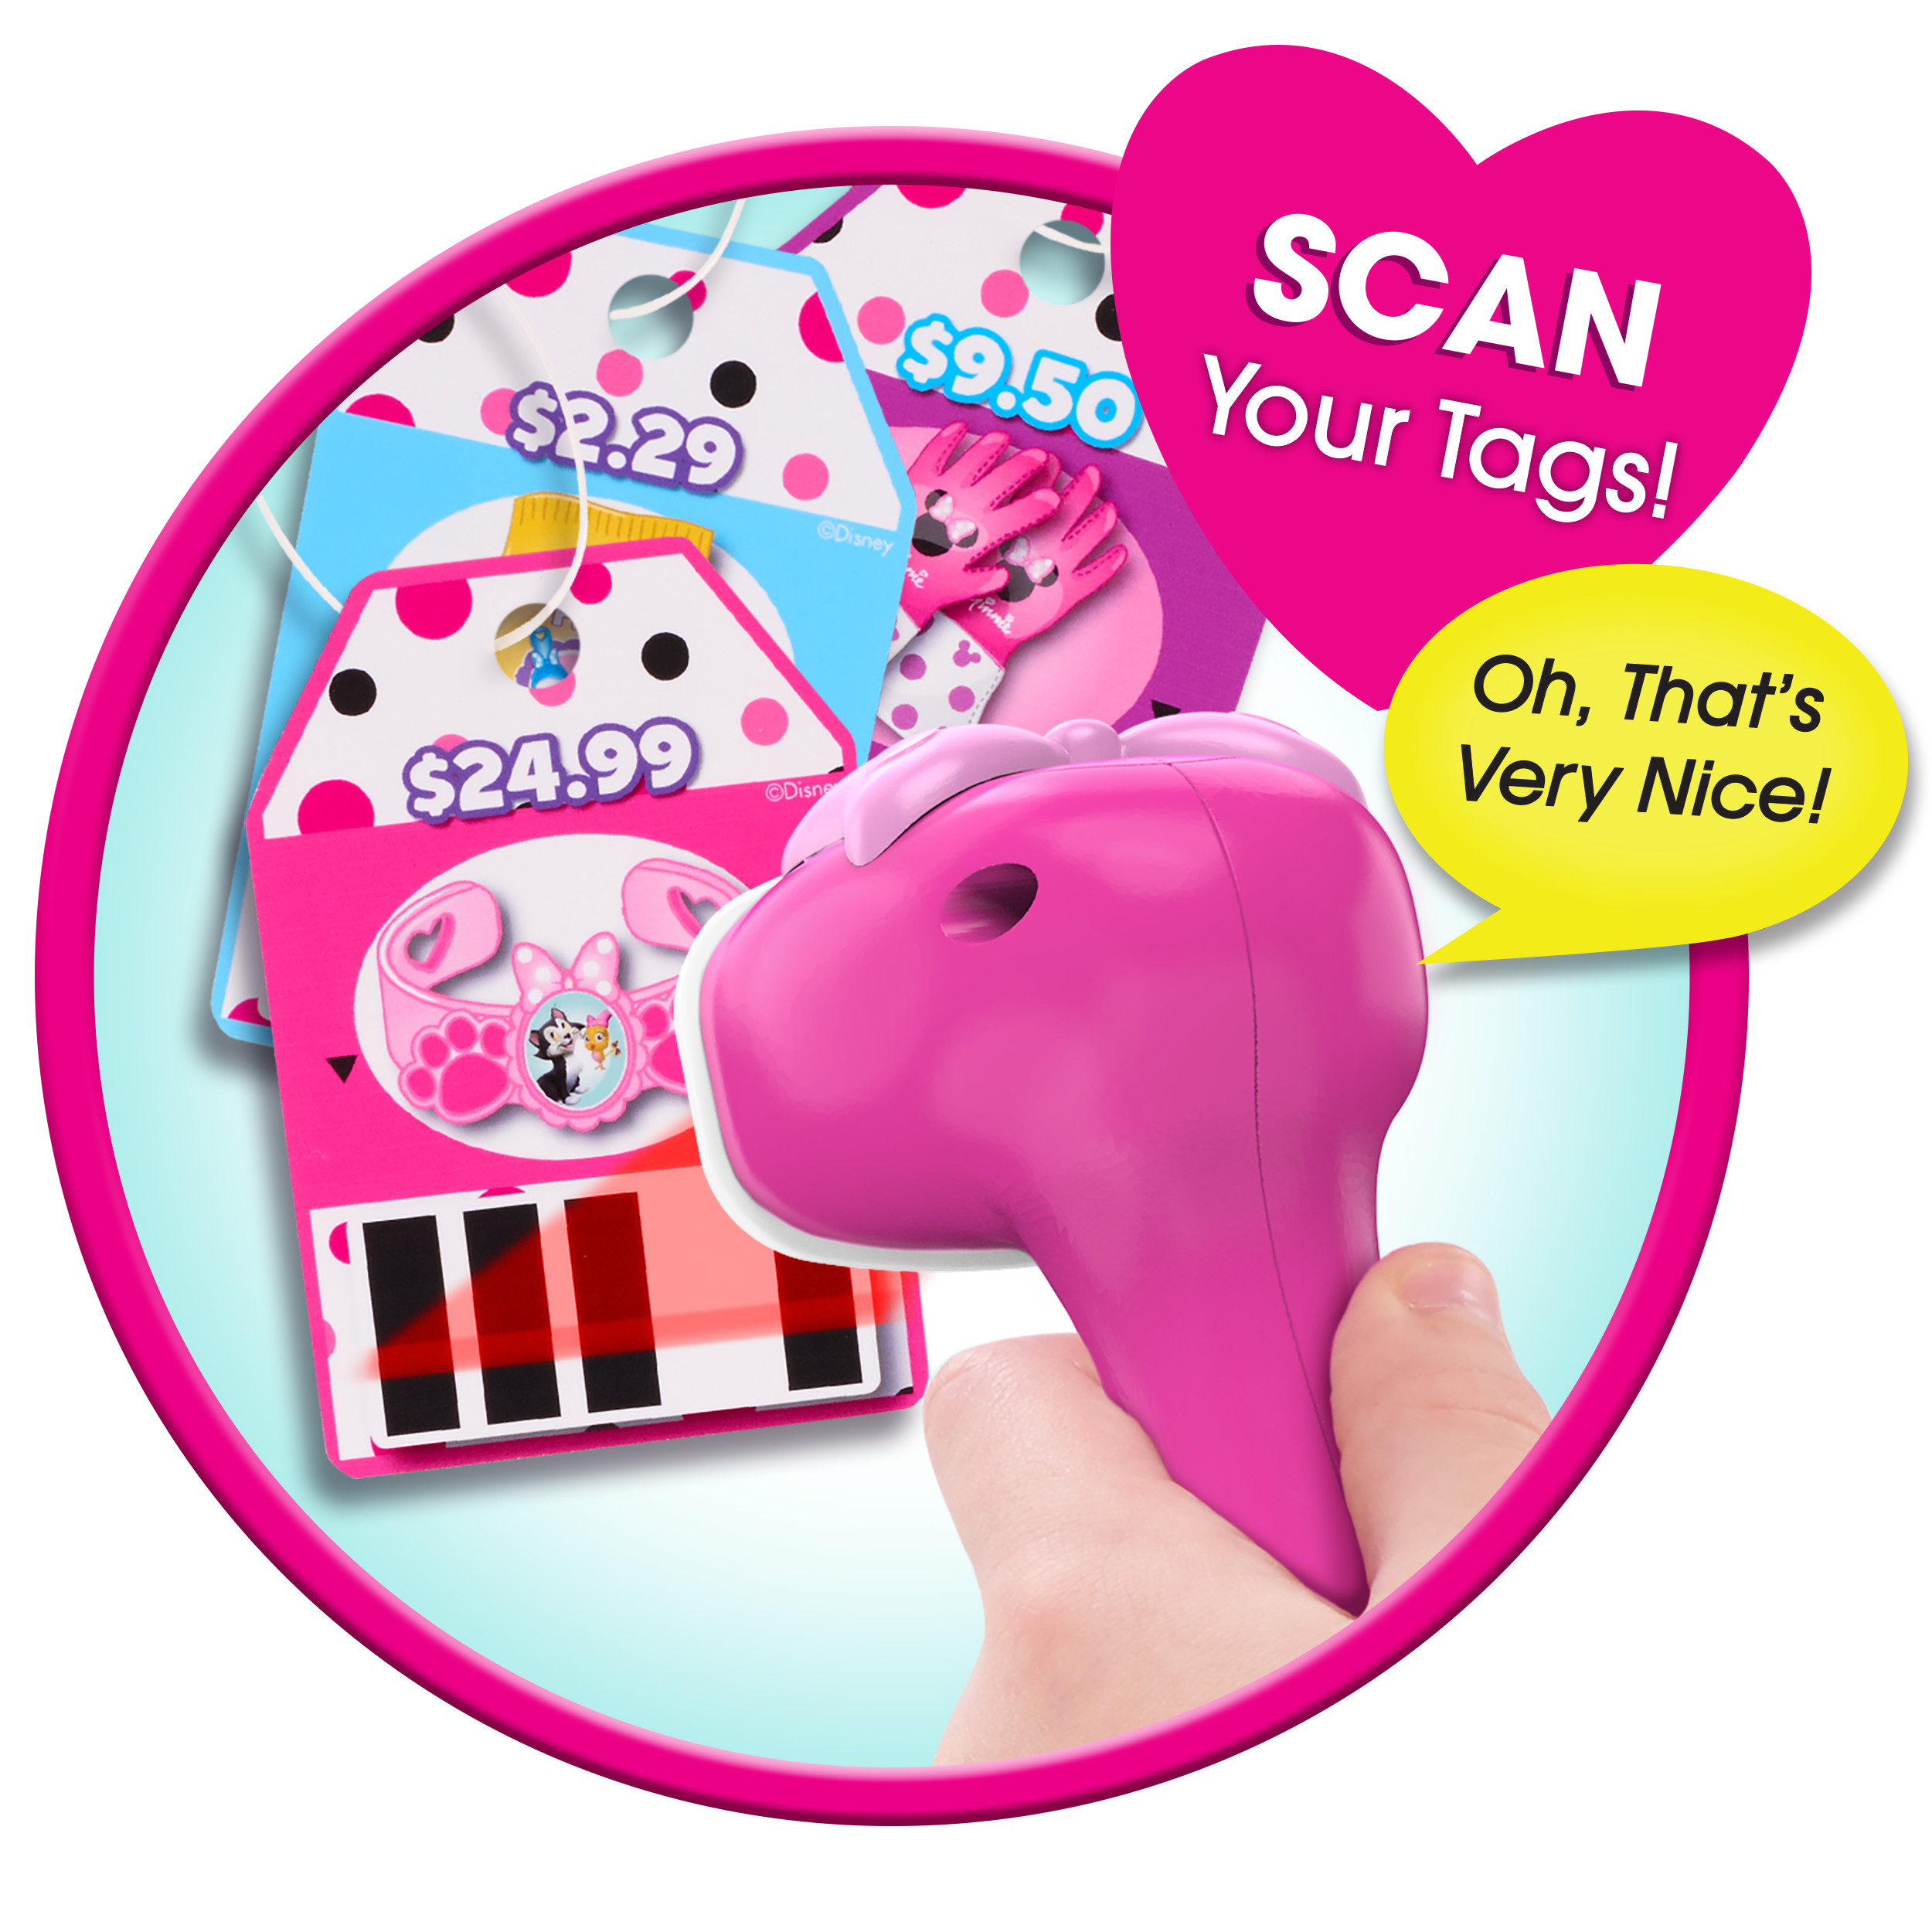 Minnie's Happy Helpers Shop N' Scan Talking Cash Register, Role Play, Ages 3 Up, by Just Play - image 5 of 7